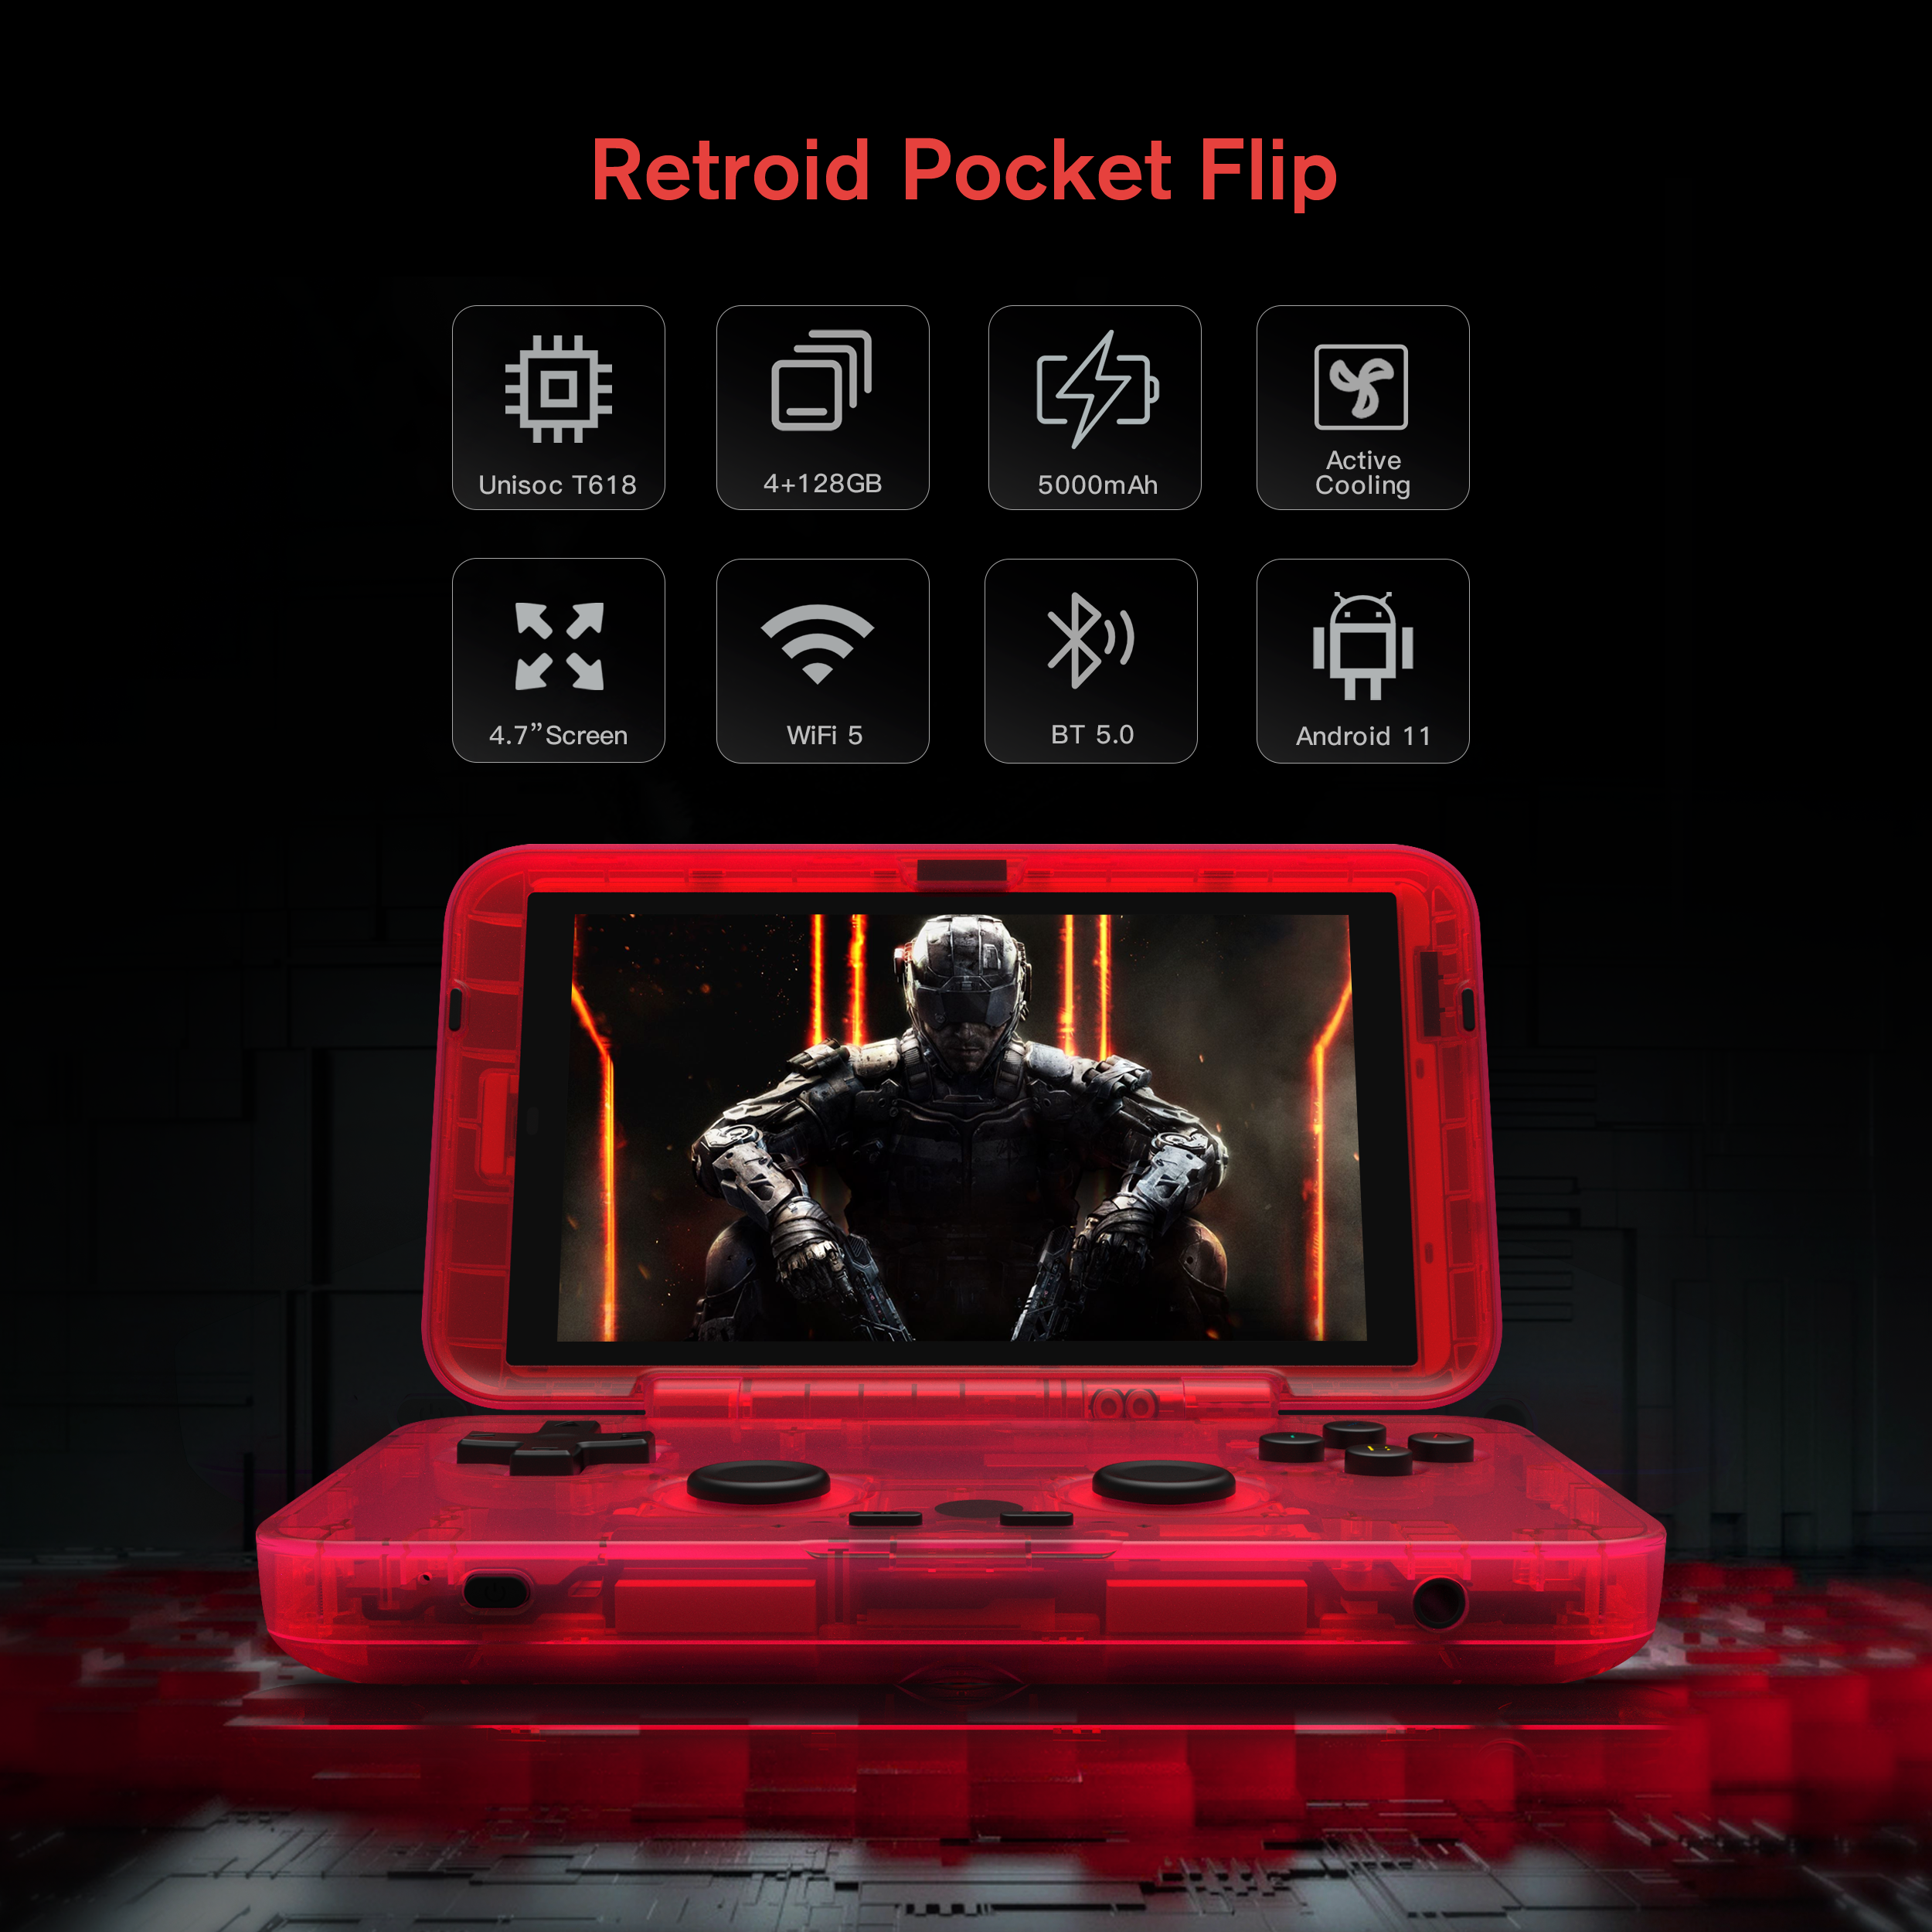 Retroid Pocket 3 Plus 4.7 Inch Handheld Game Console With 4G128G, Android  11, Touch Screen, 2.4G/5G Wifi, 4500mAh Battery, 618 DDR4, Perfect Gift  From Ning04, $219.14